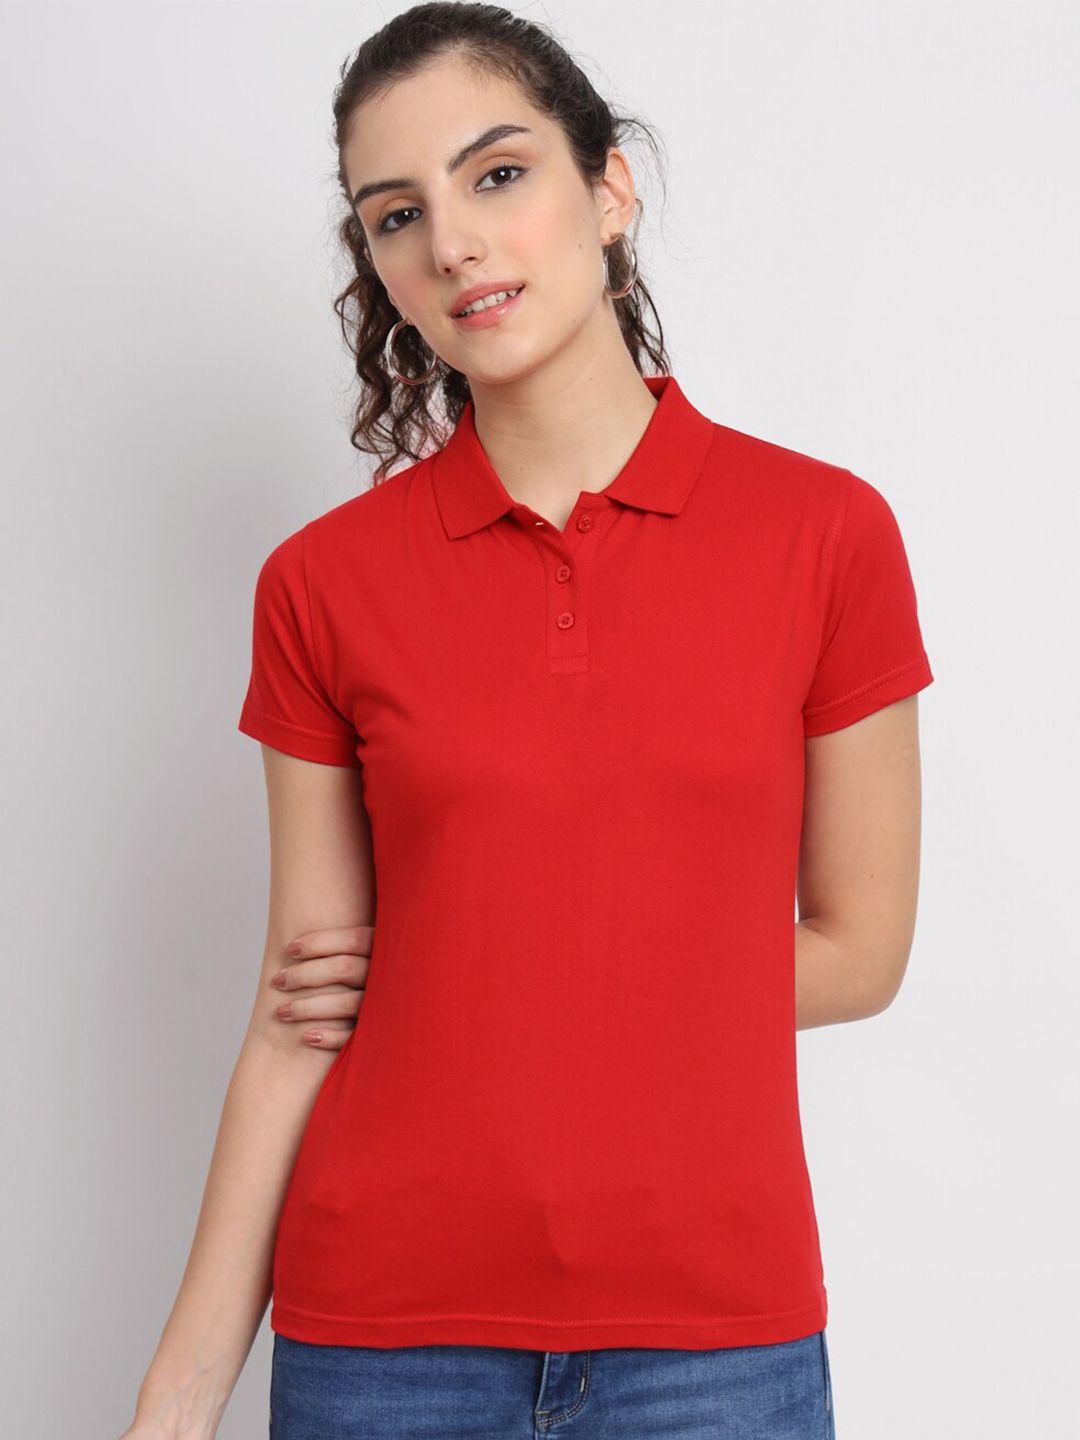 appulse-women-red-polo-collar-pockets-slim-fit-t-shirt